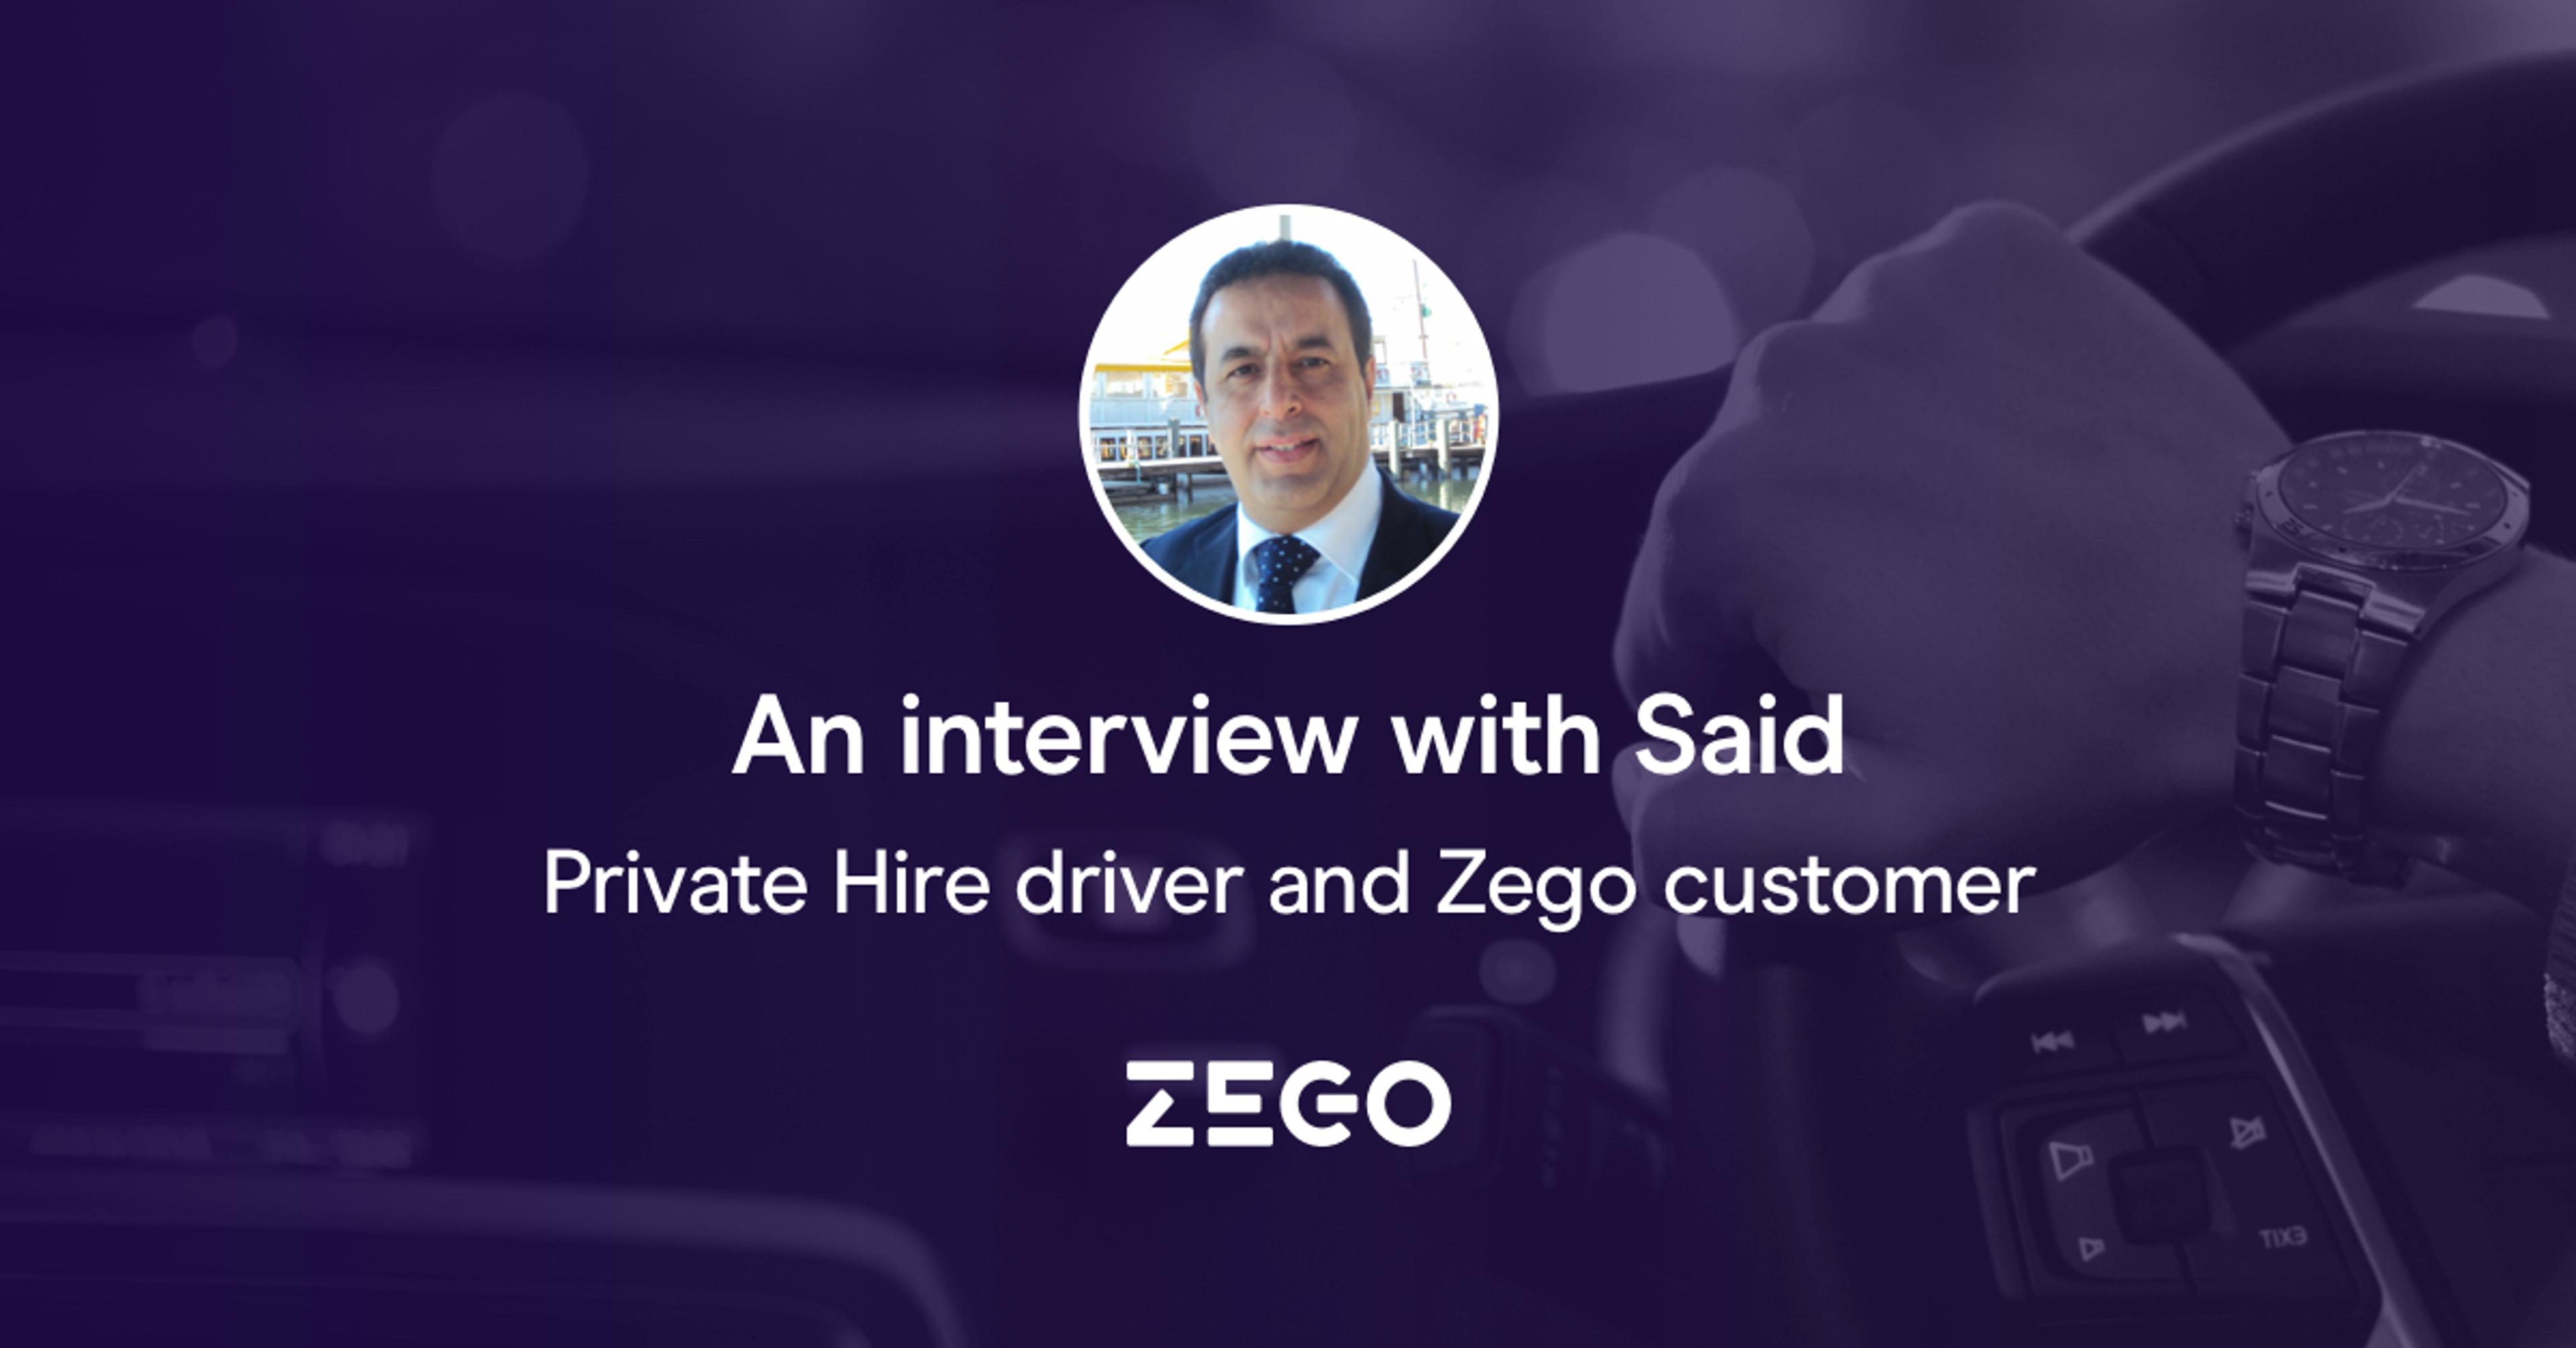 An interview with Said: A Zego Private Hire customer